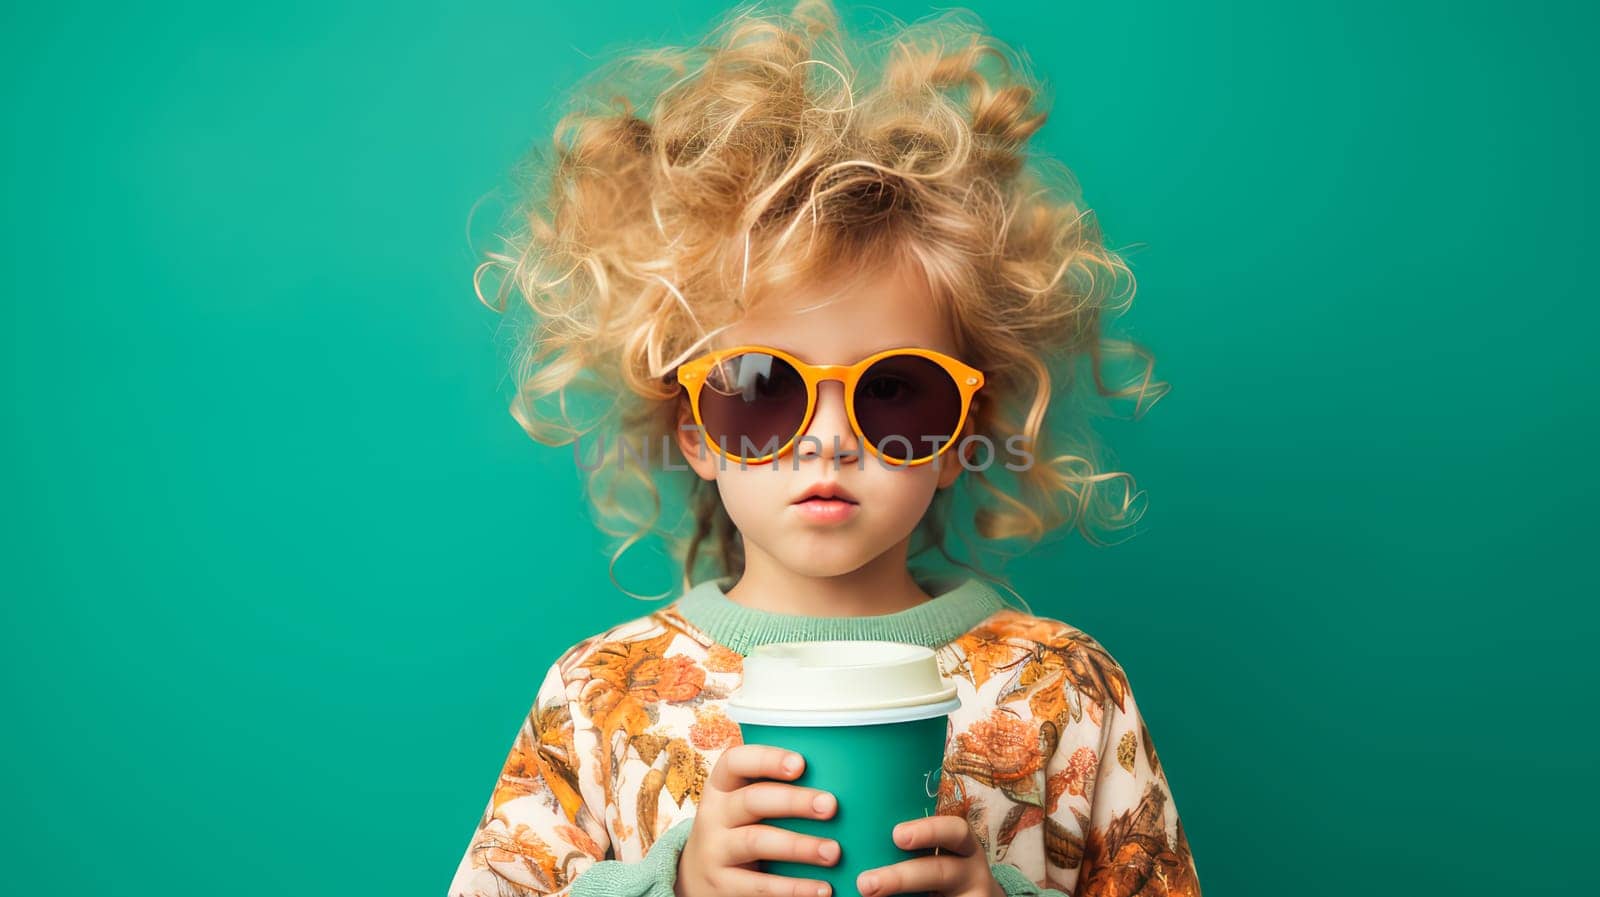 Portrait of a curly girl with a paper glass of coffee on a green background in watercolor style. Cheerful daring modern child in fashionable sunglasses.